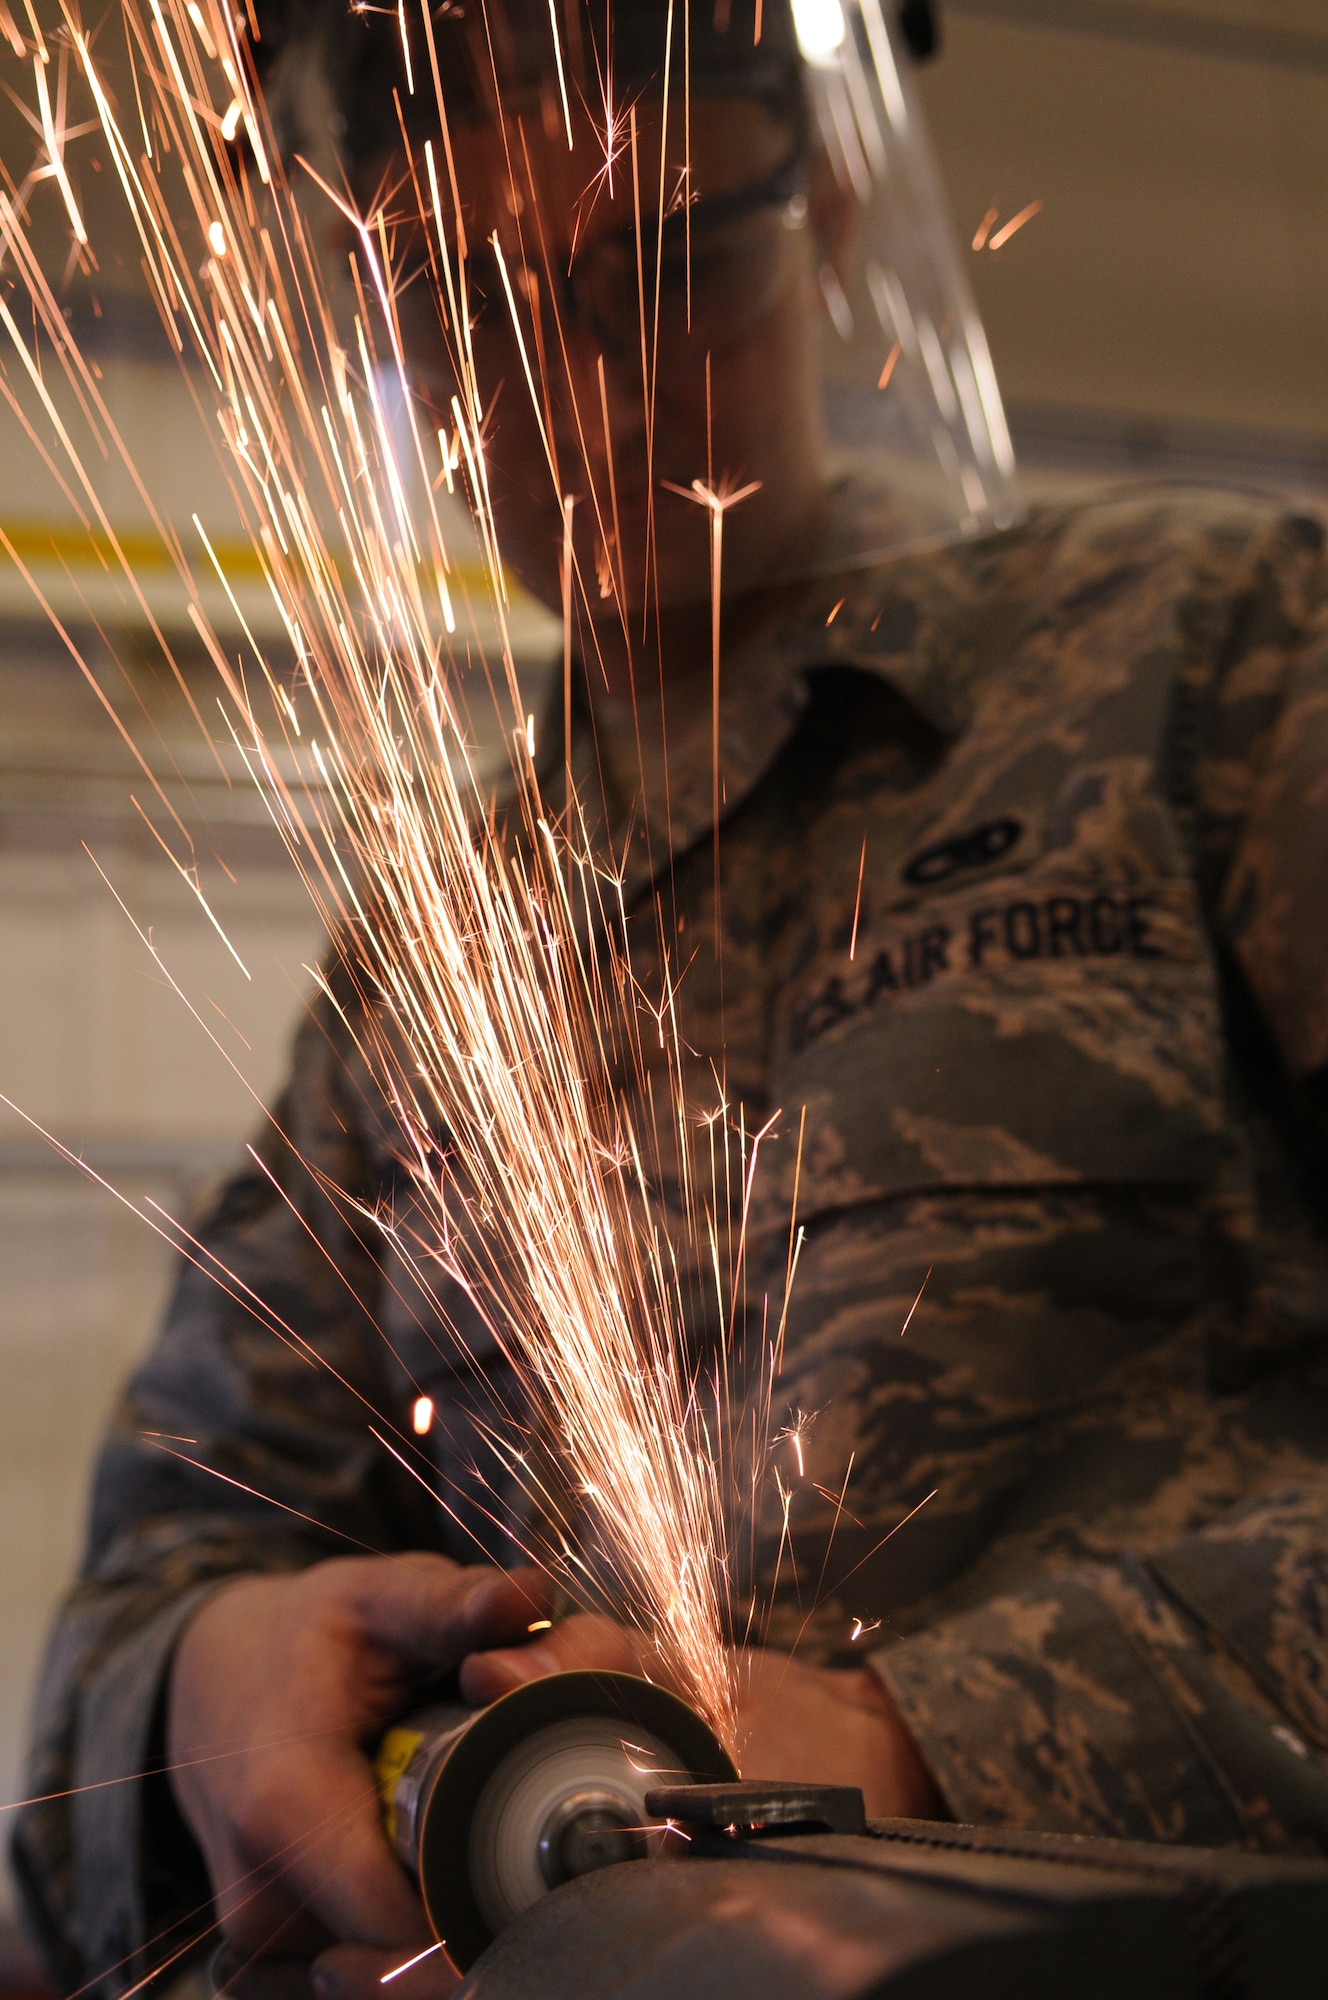 Airman 1st Class Travis Roland, an aircraft structural apprentice from the 100th Maintenance Squadron, fabricates two “L” brackets for a KC-135 Oct. 1, 2008, at RAF Mildenhall, England. Airman Roland’s duties are vast from simple nut plate replacements to complicated aircraft structural repairs and the art of bending, forming, cutting, and shaping of sheet metal to specific shapes and sizes. (U.S. Air Force photo by Staff Sgt. Jerry Fleshman)